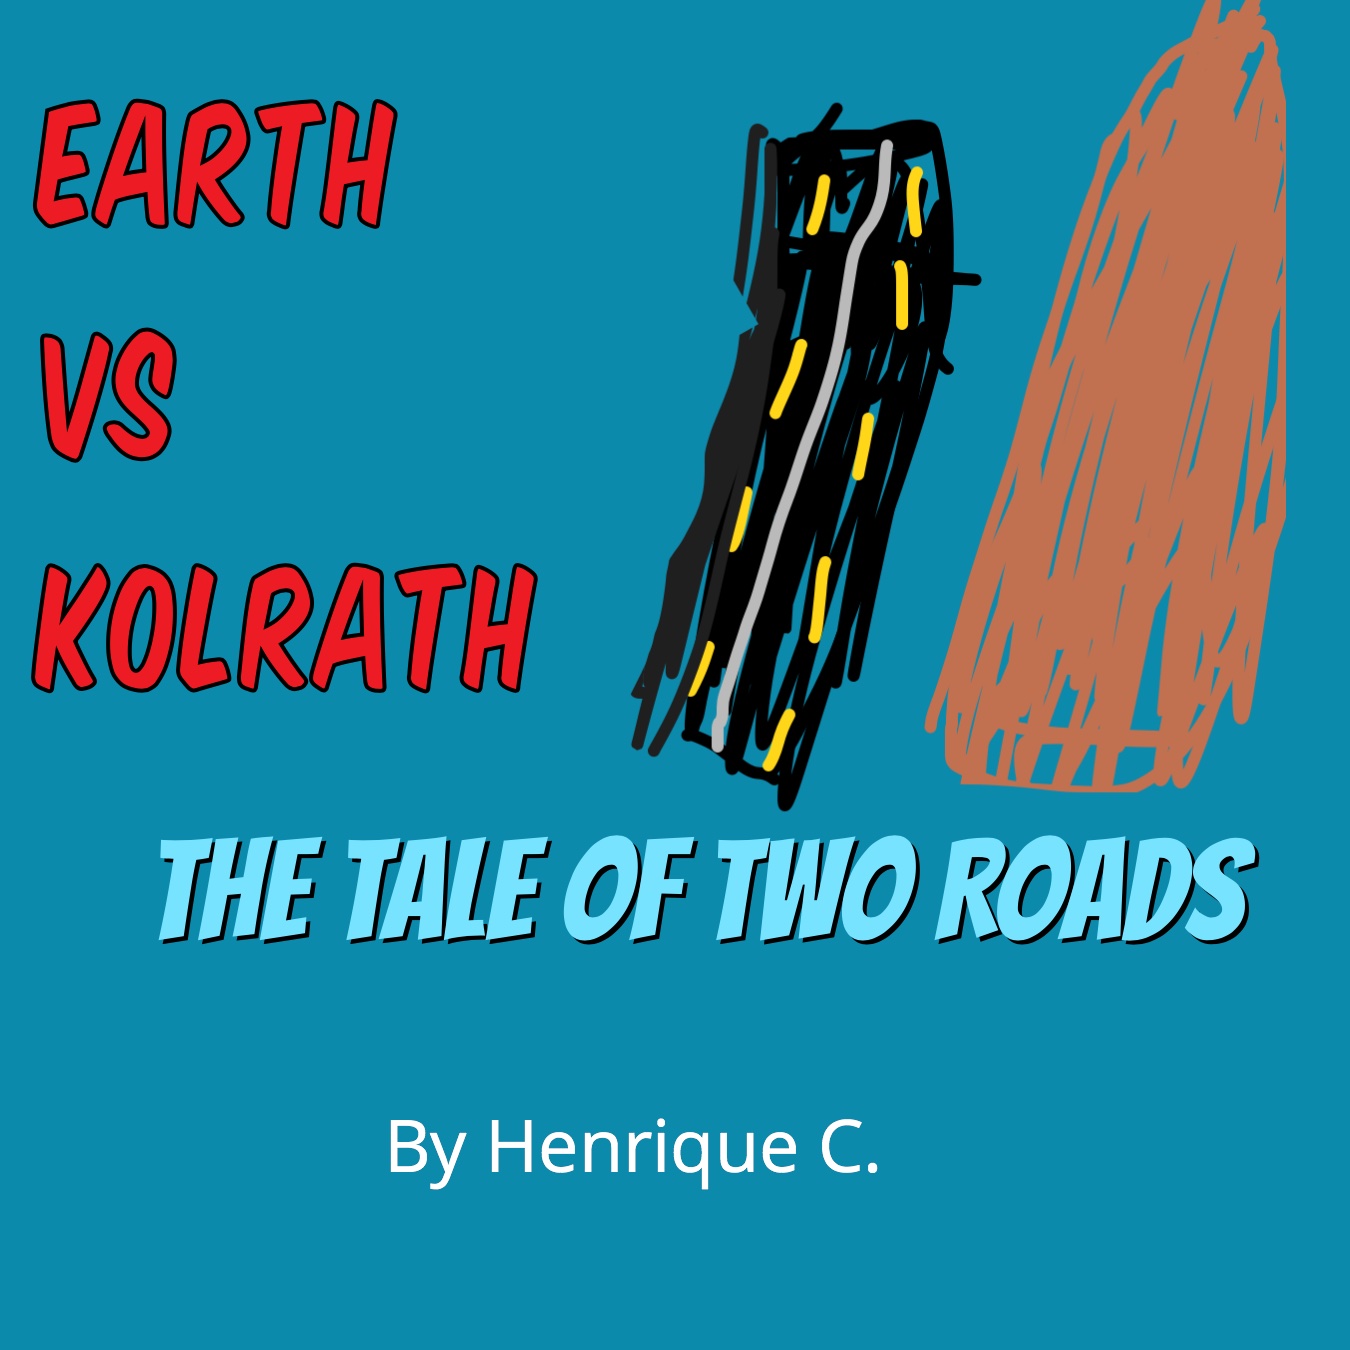 The Battle of the Two Roads by Henrique C